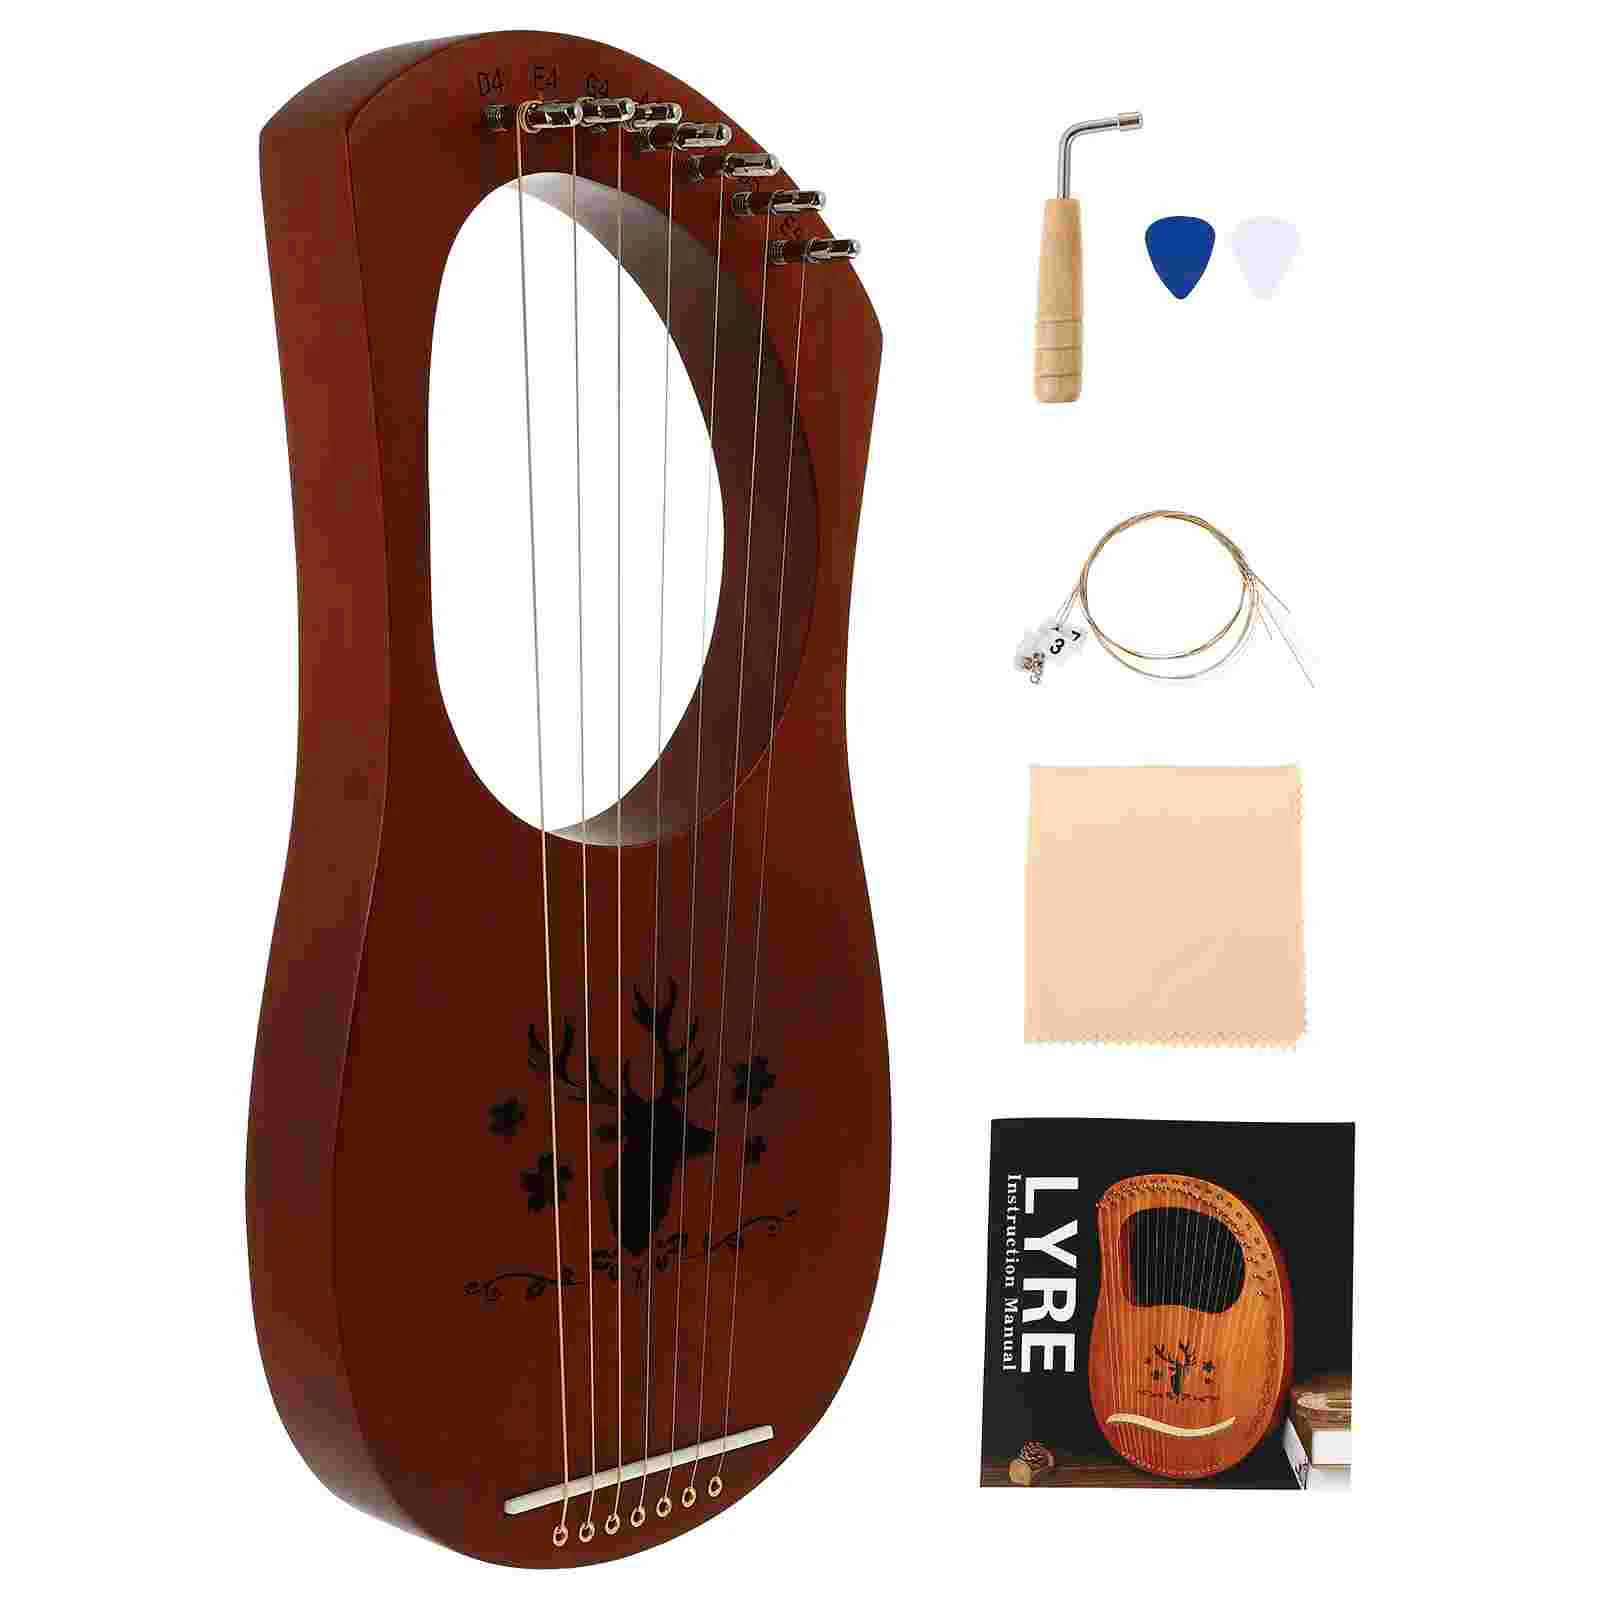 

7-note Lyre Wood Harp Musical Instrument Wooden Wrench Harmony Ancient Style Mahogany Crafts